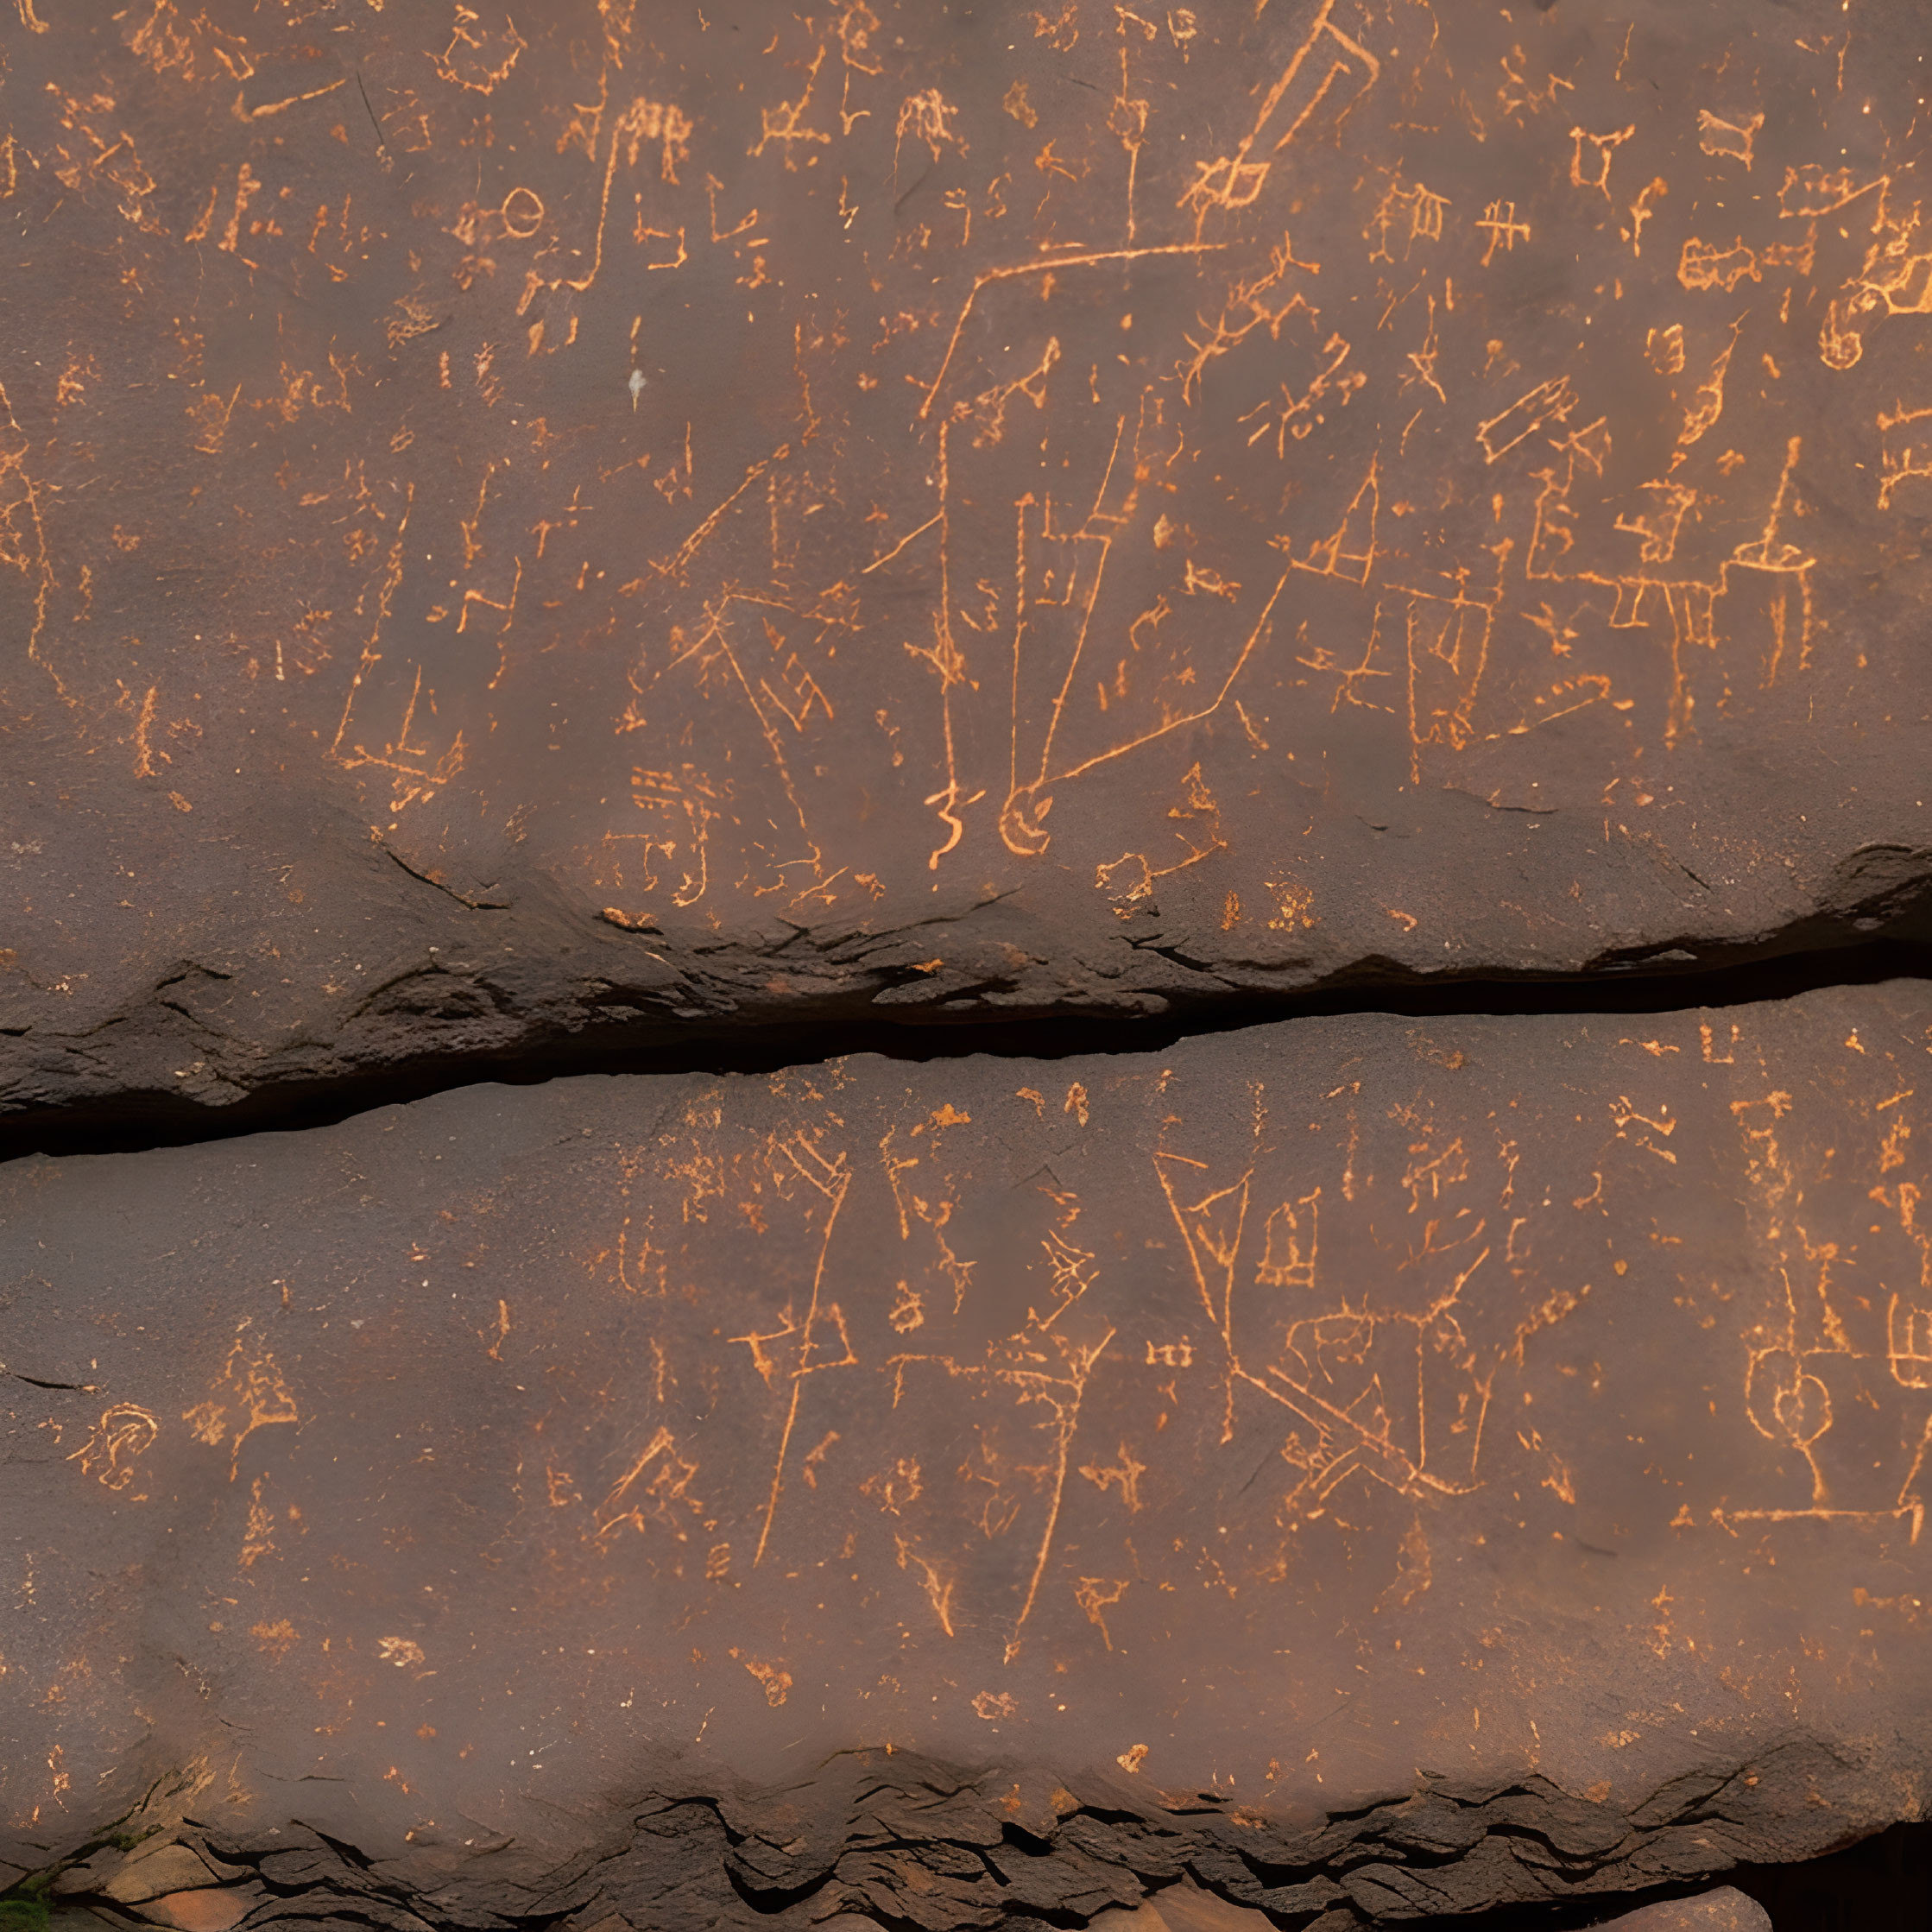 20,000-year-old cave drawings are a proto-writing 